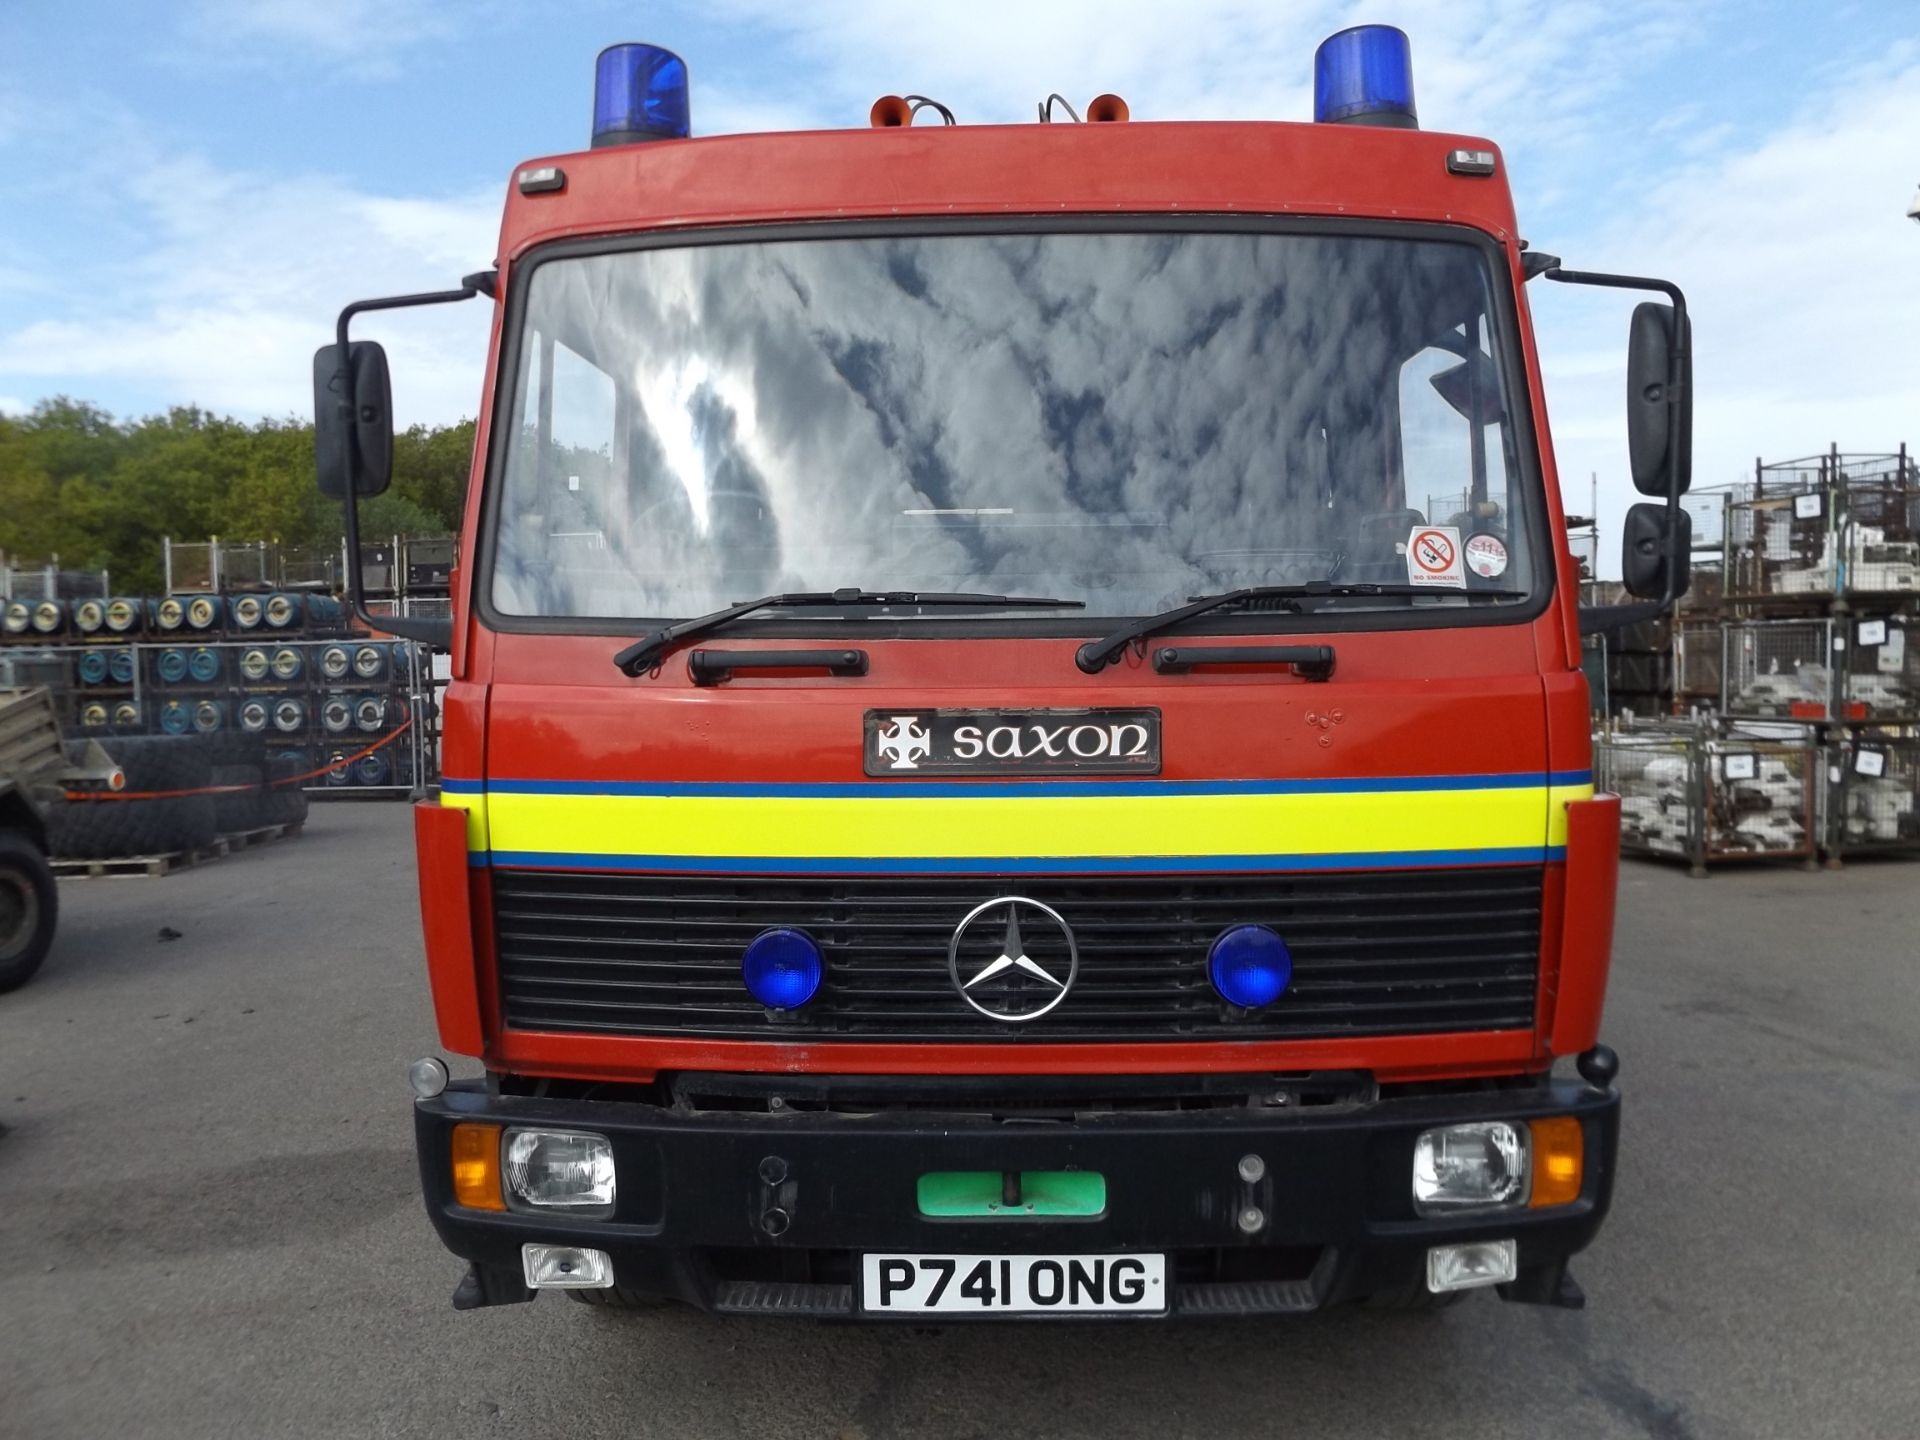 Mercedes 1124 Excaliber Fire Engine - Image 2 of 16